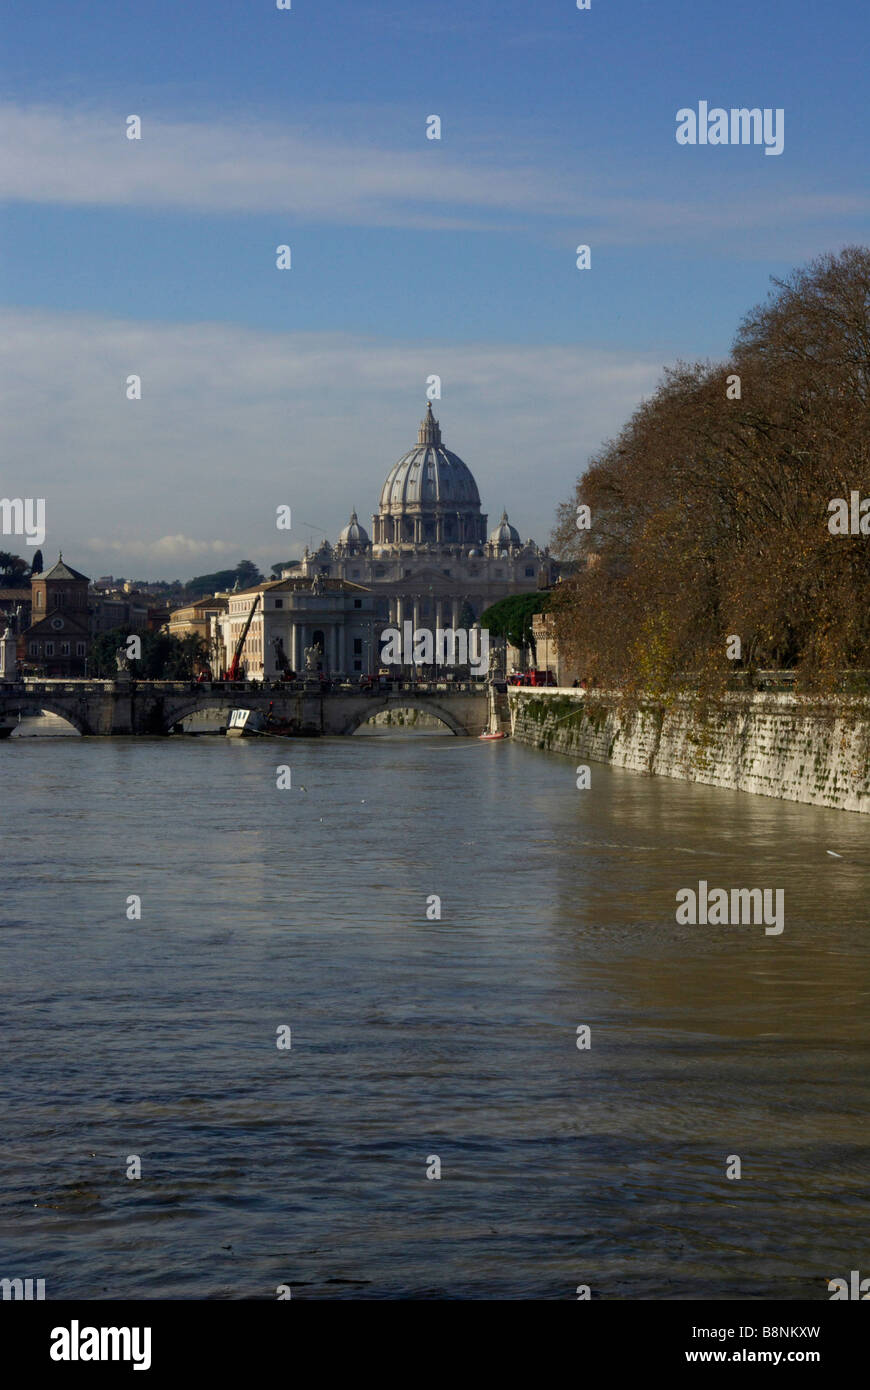 Saint Peter's cathedral during high water levels of river Tiber, Rome, Italy Stock Photo